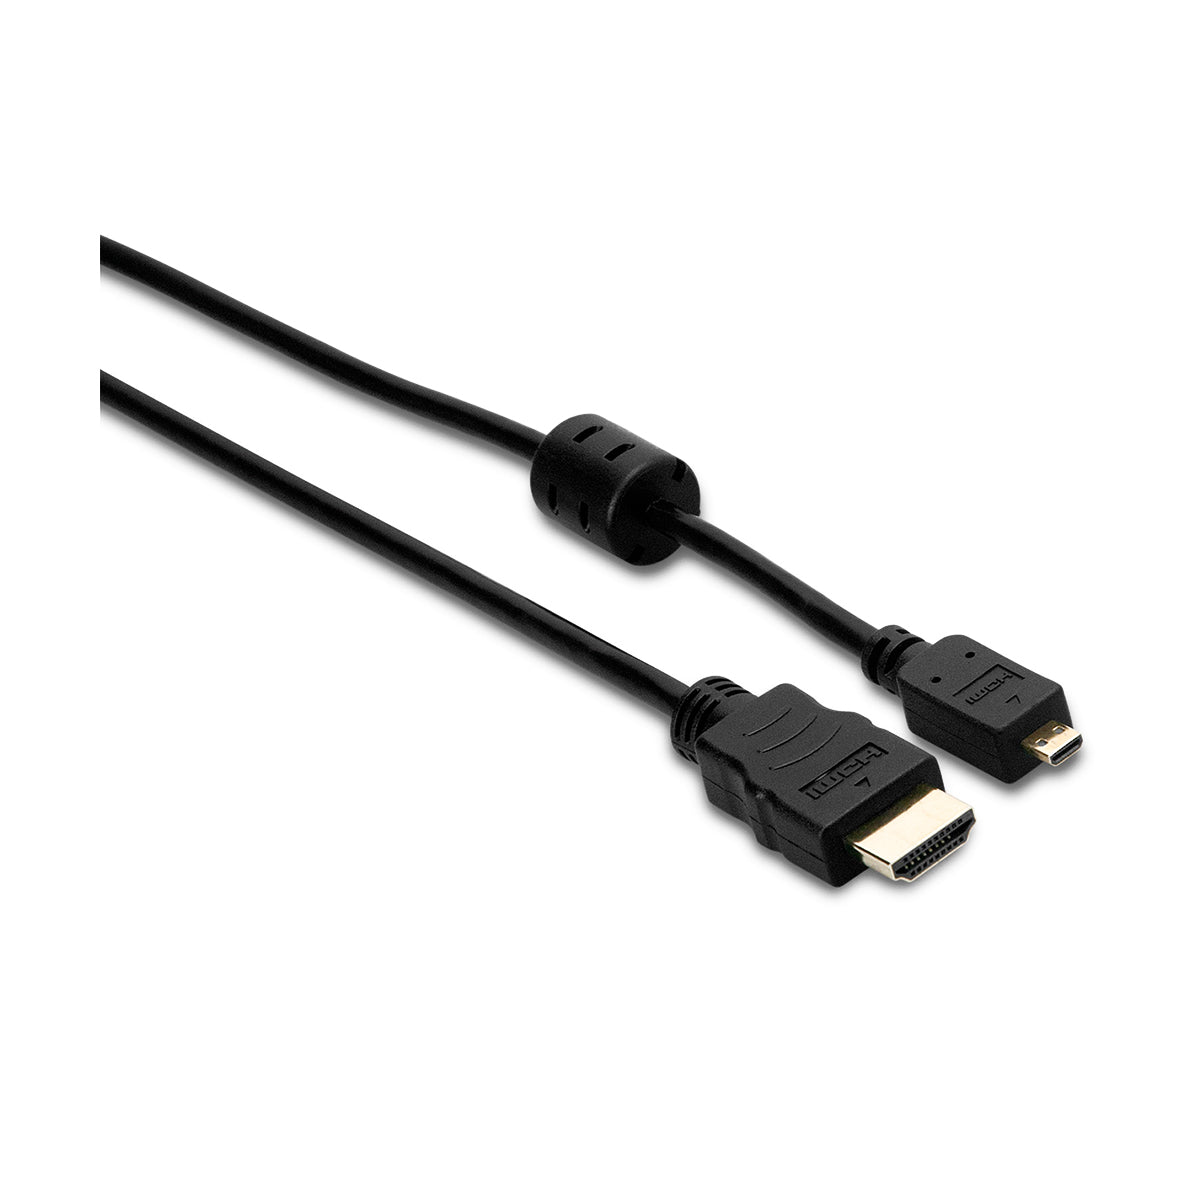 Hosa High Speed HDMI Cable - HDMI to HDMI Micro, 10 ft